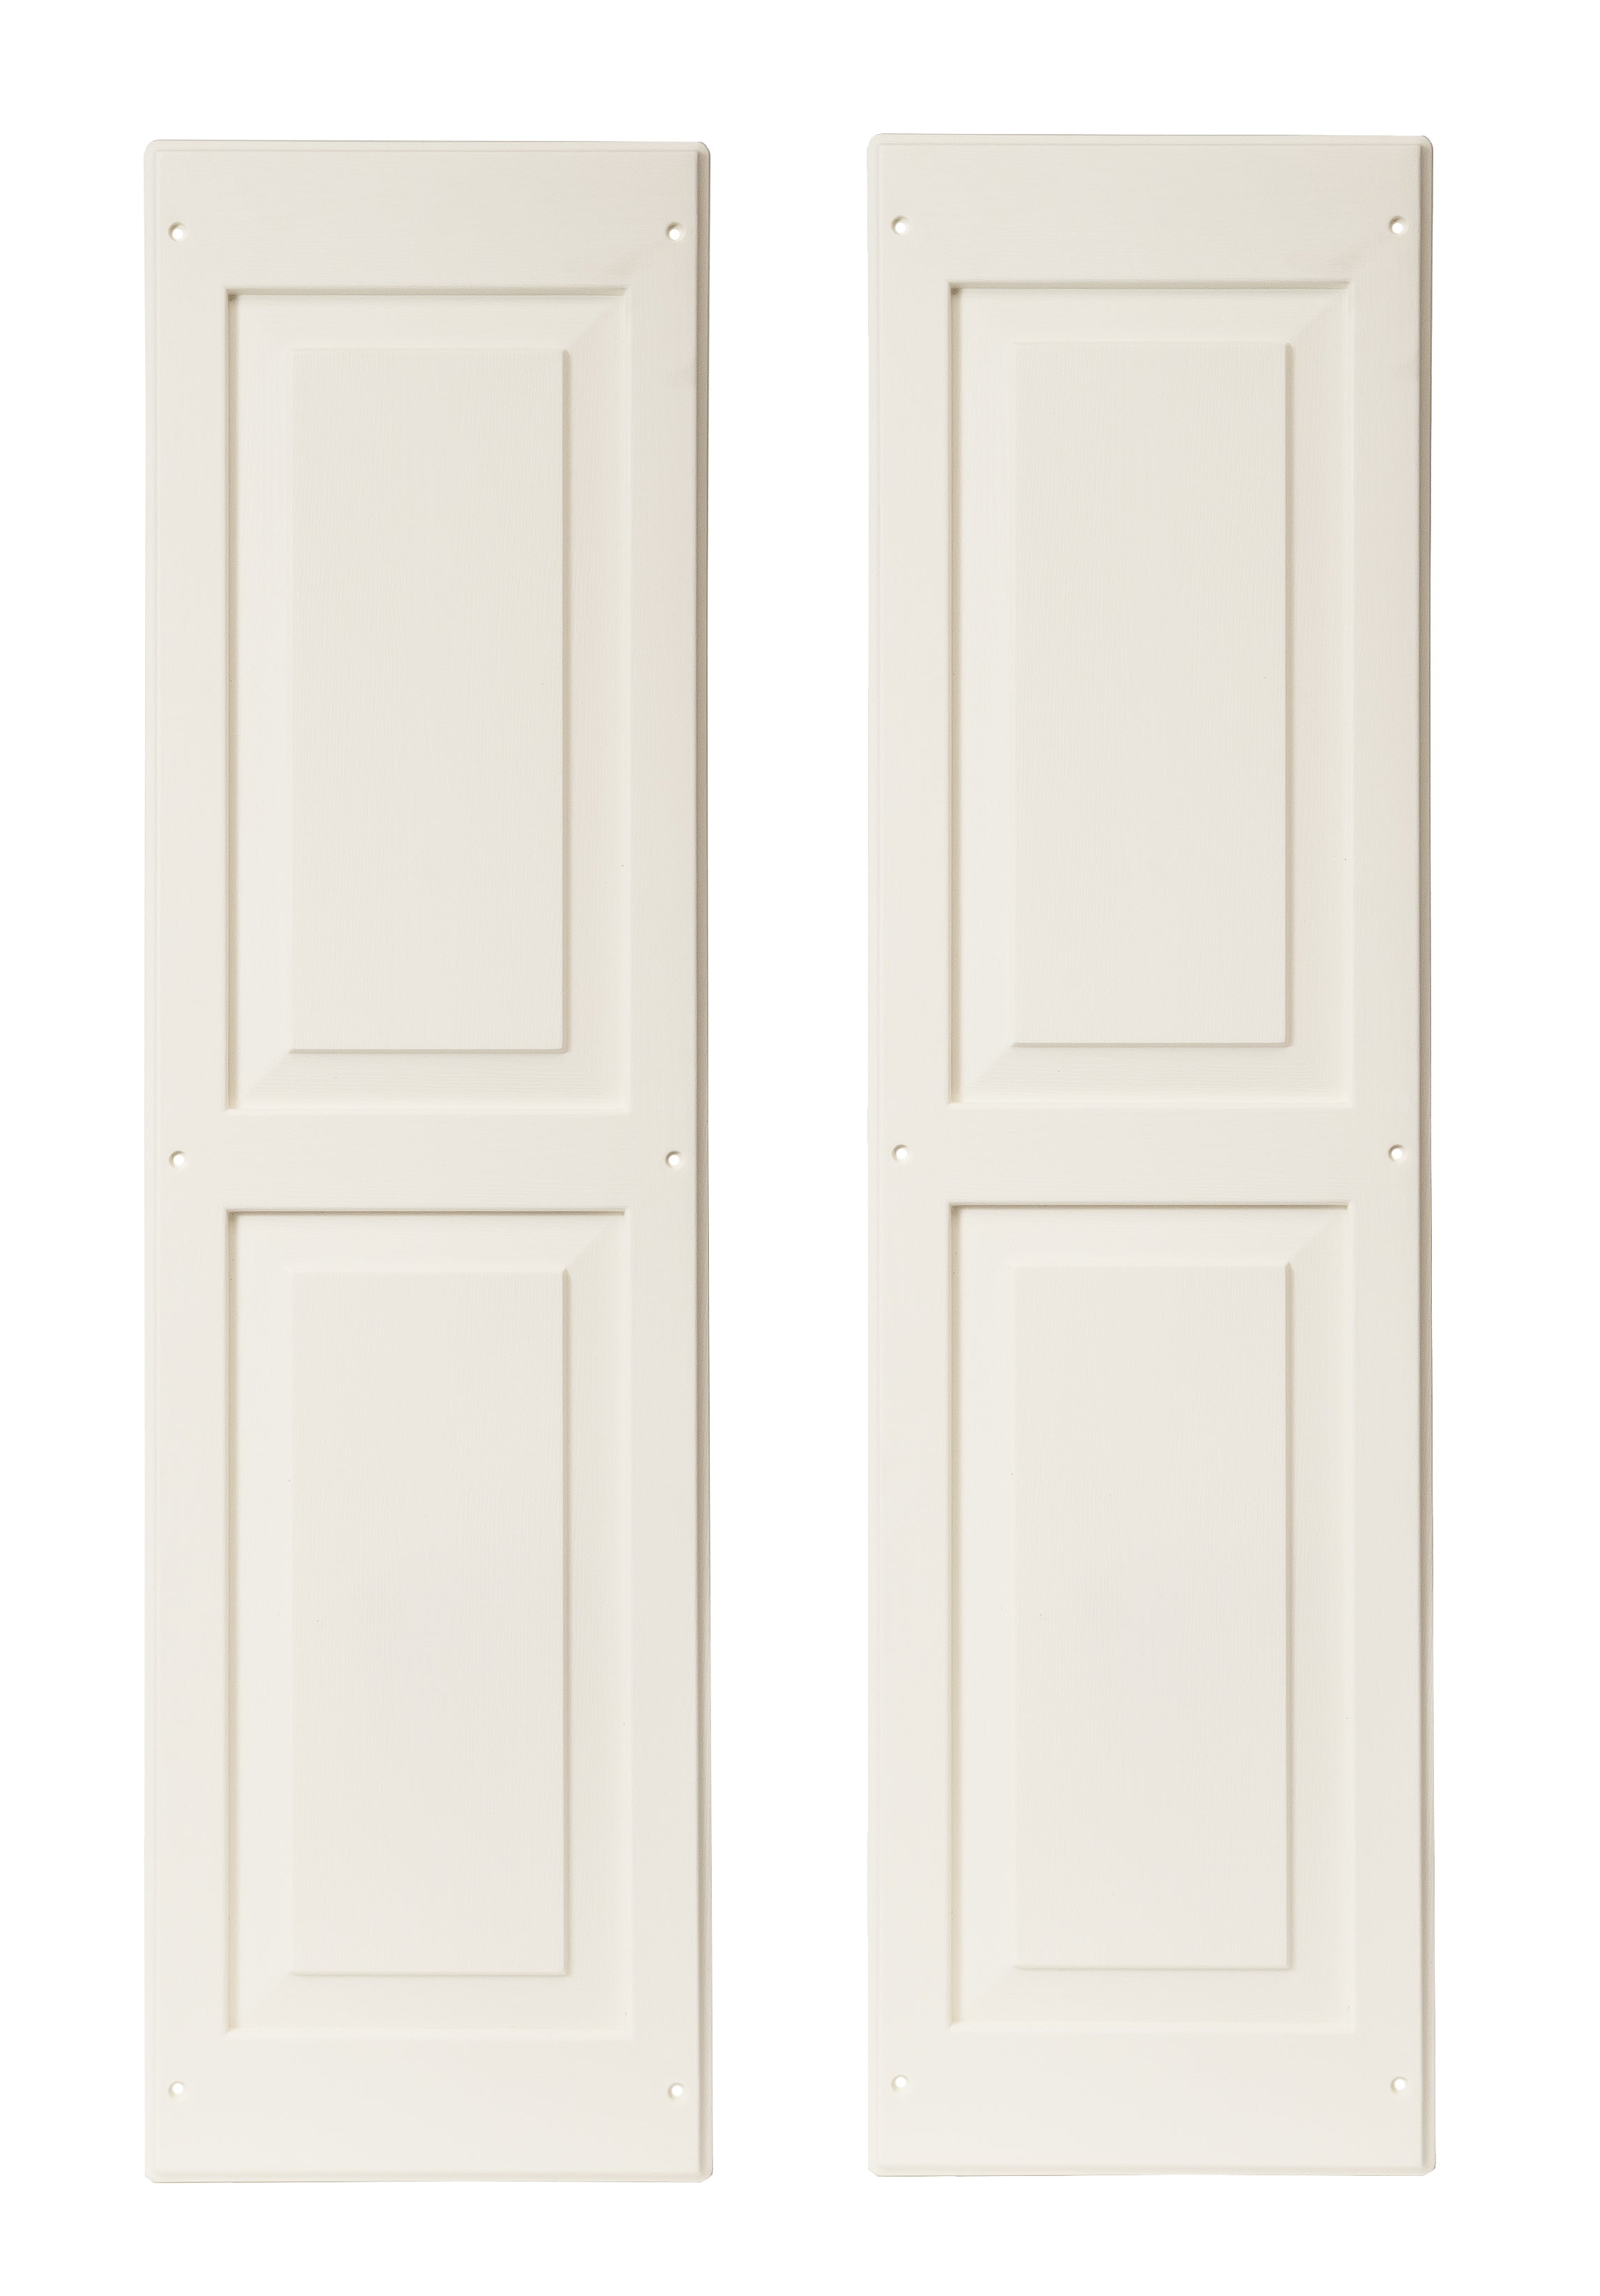 Pair of 12" W x  43" H Raised Panel Paintable Shutters for Sheds, Playhouses, and MORE 